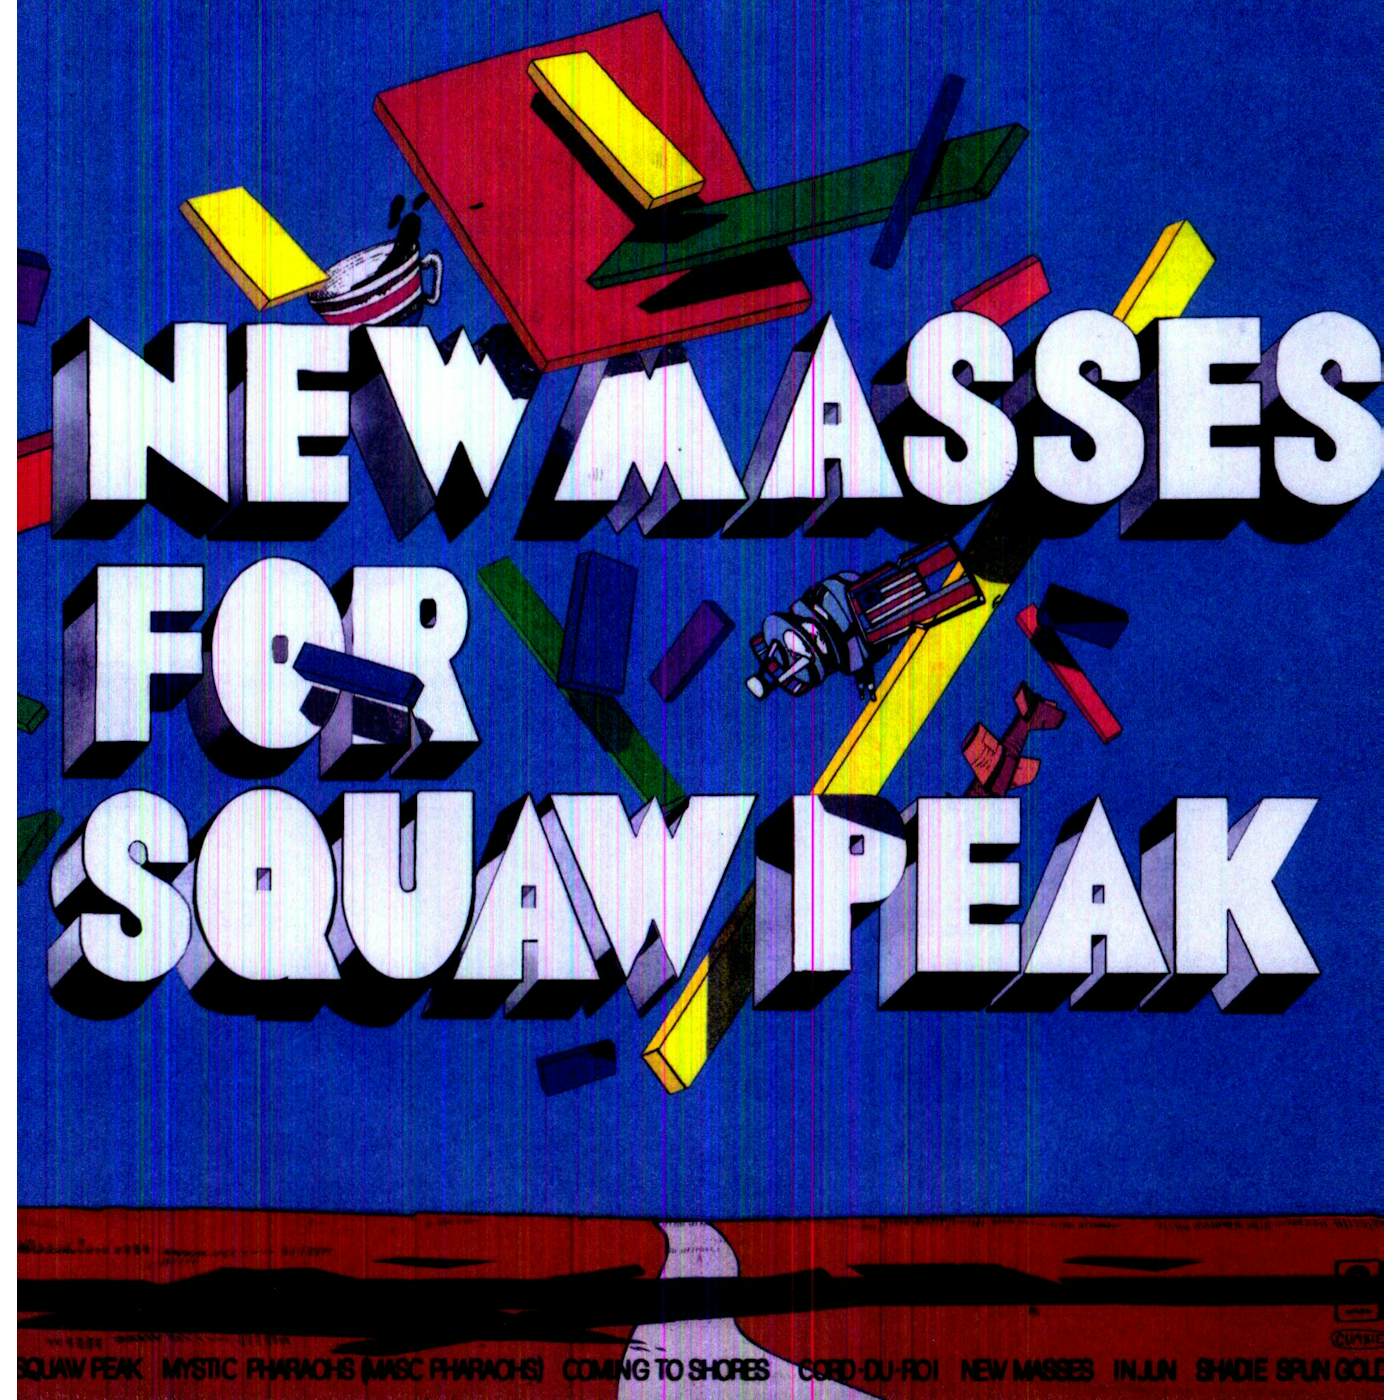 Holiday Shores New Masses for Squaw Peak Vinyl Record